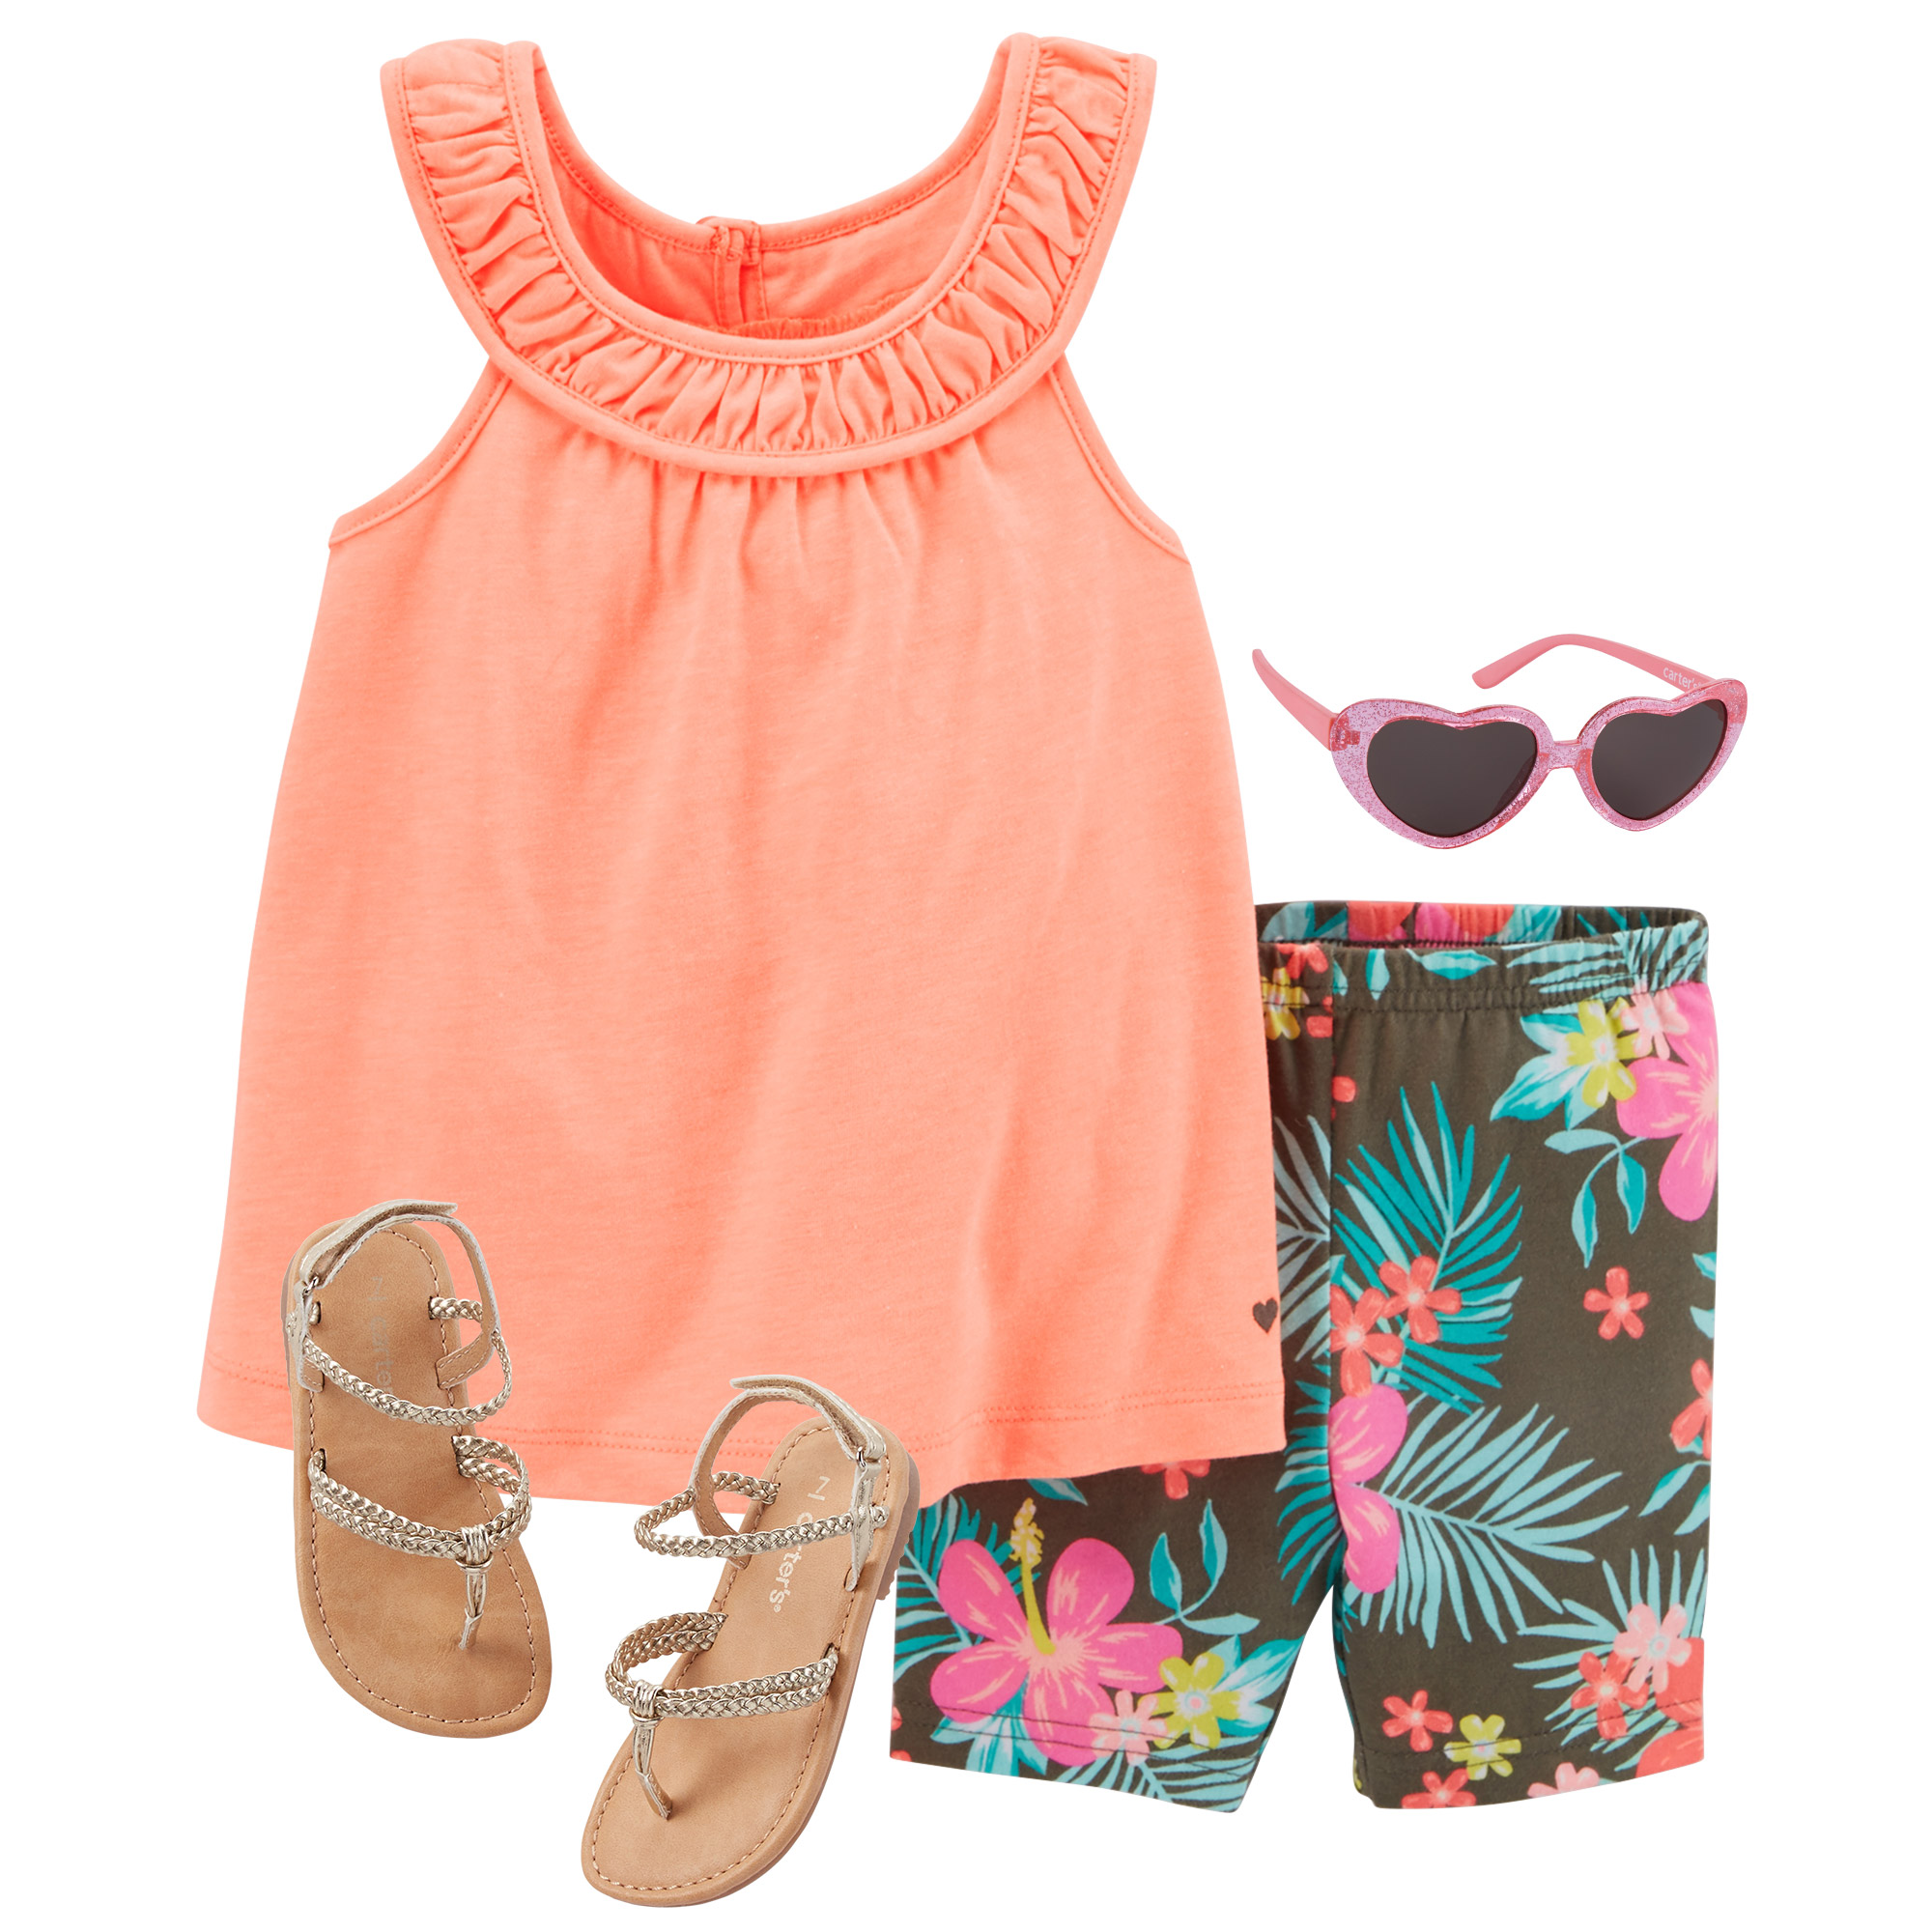 Summer Outfits for Little Girls Outfit Ideas HQ